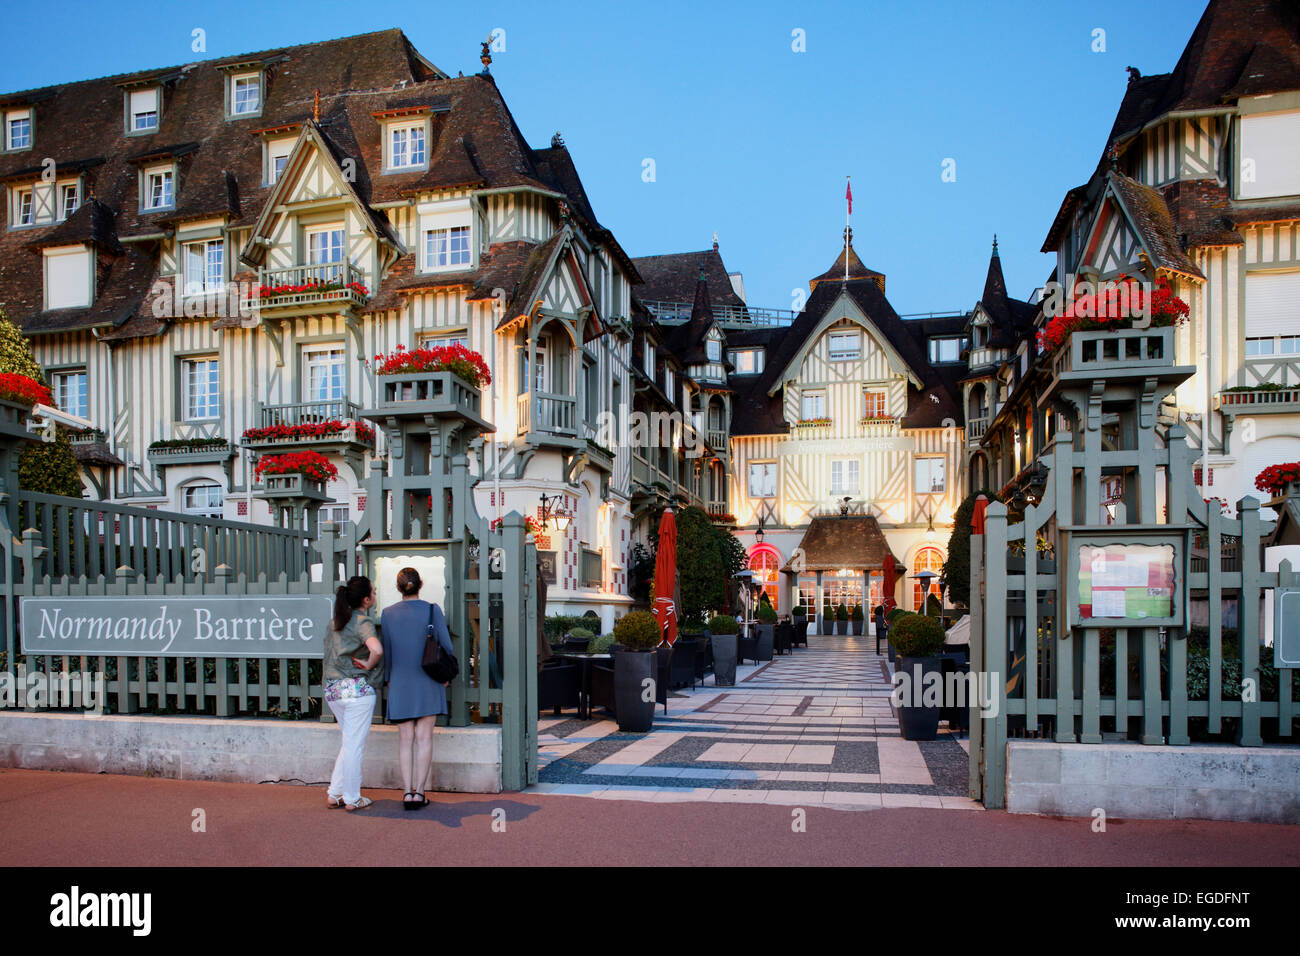 Hotel Le Normandy Barriere, Deauville, Lower Normandy, Normandy, France Stock Photo